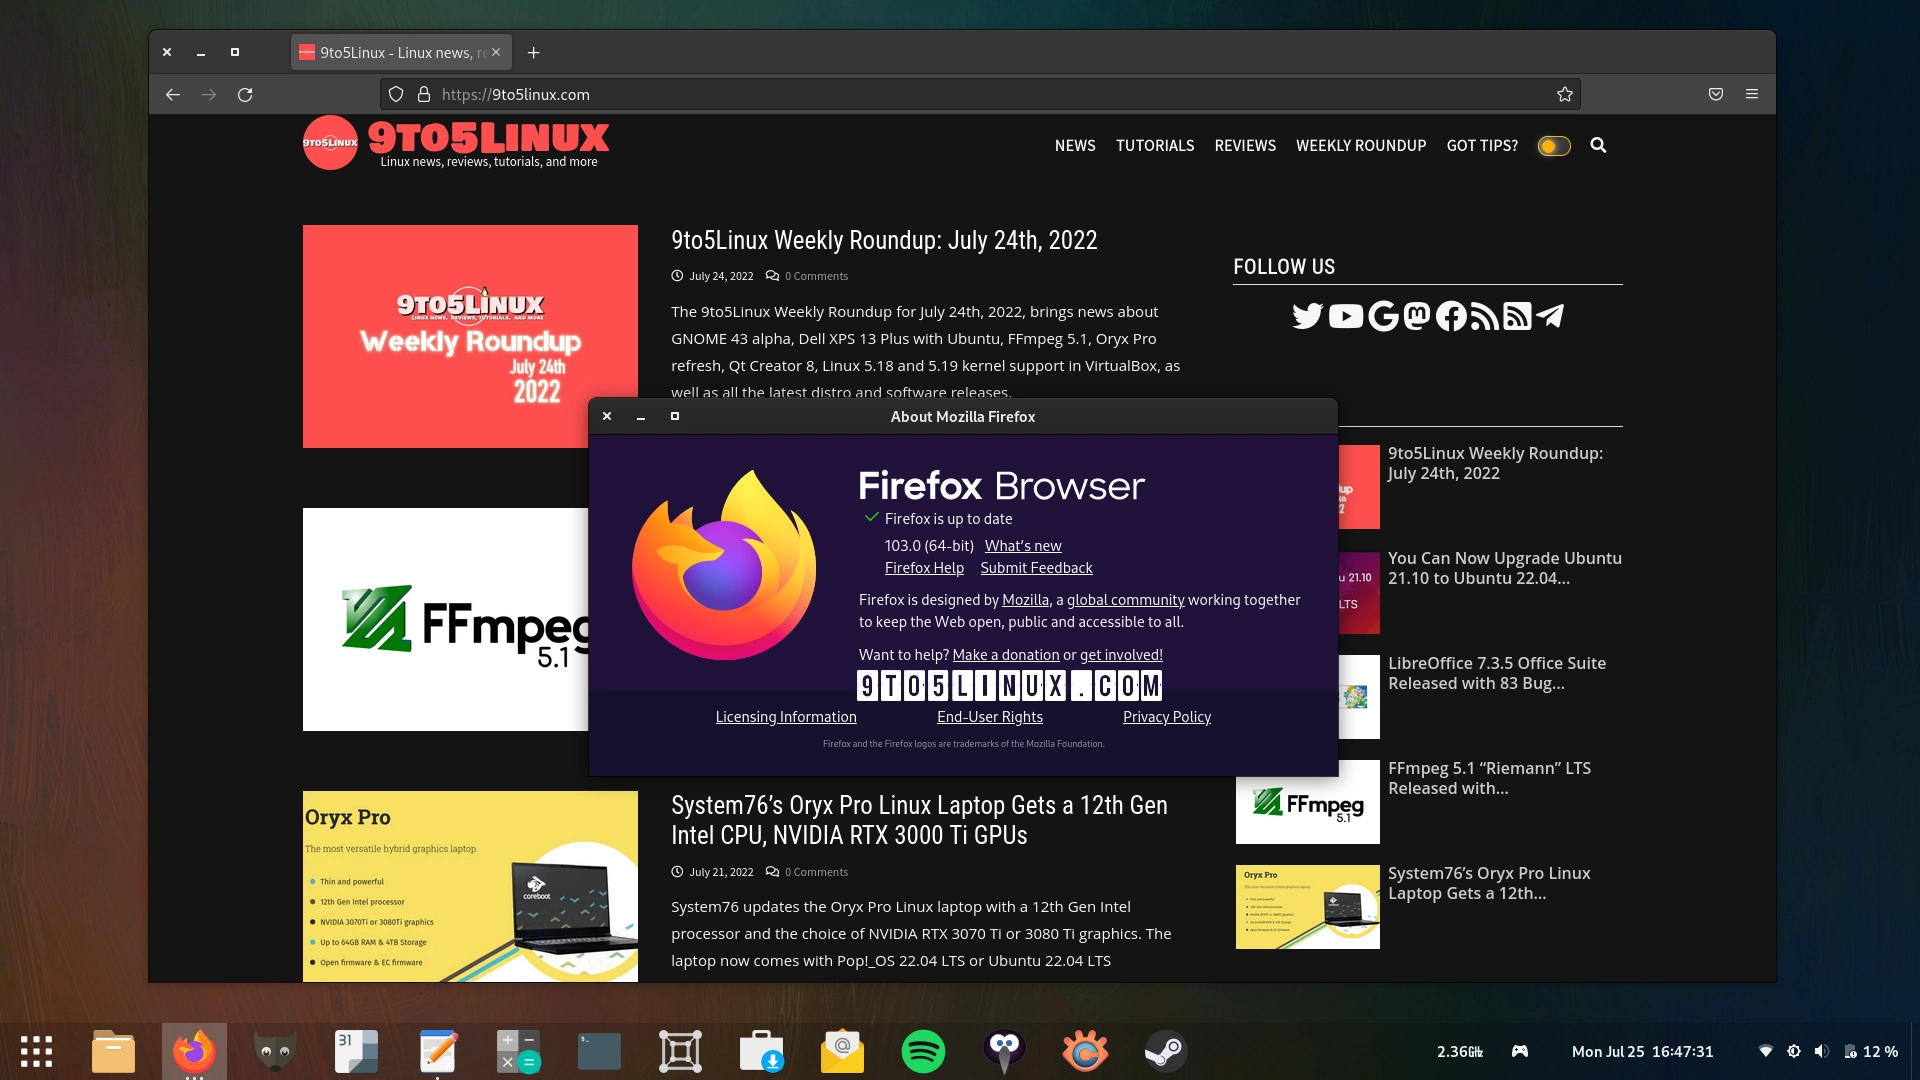 Mozilla Firefox 103 Is Now Available for Download, This Is What’s New